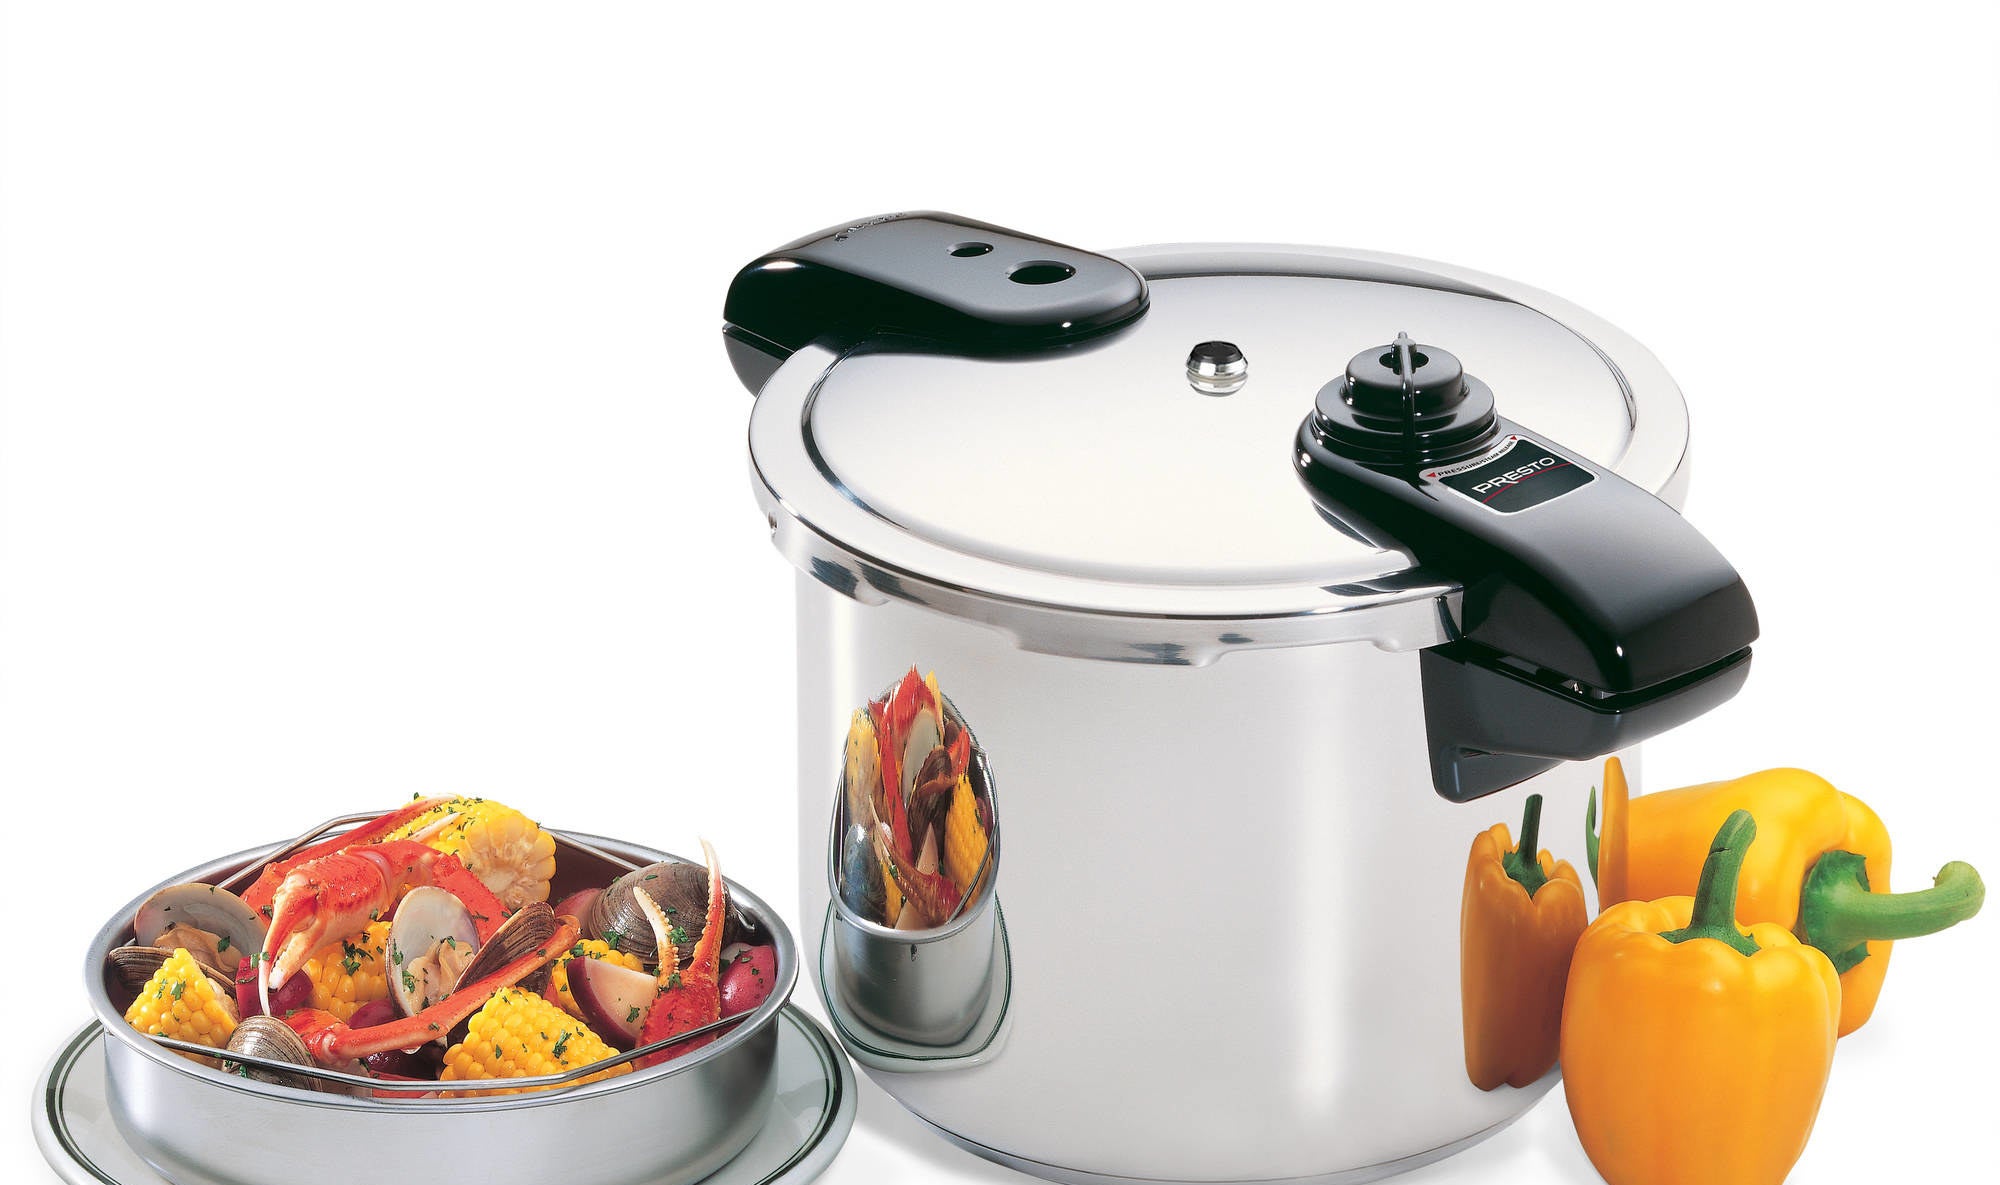  A eight-quart stainless steel pressure cooker 